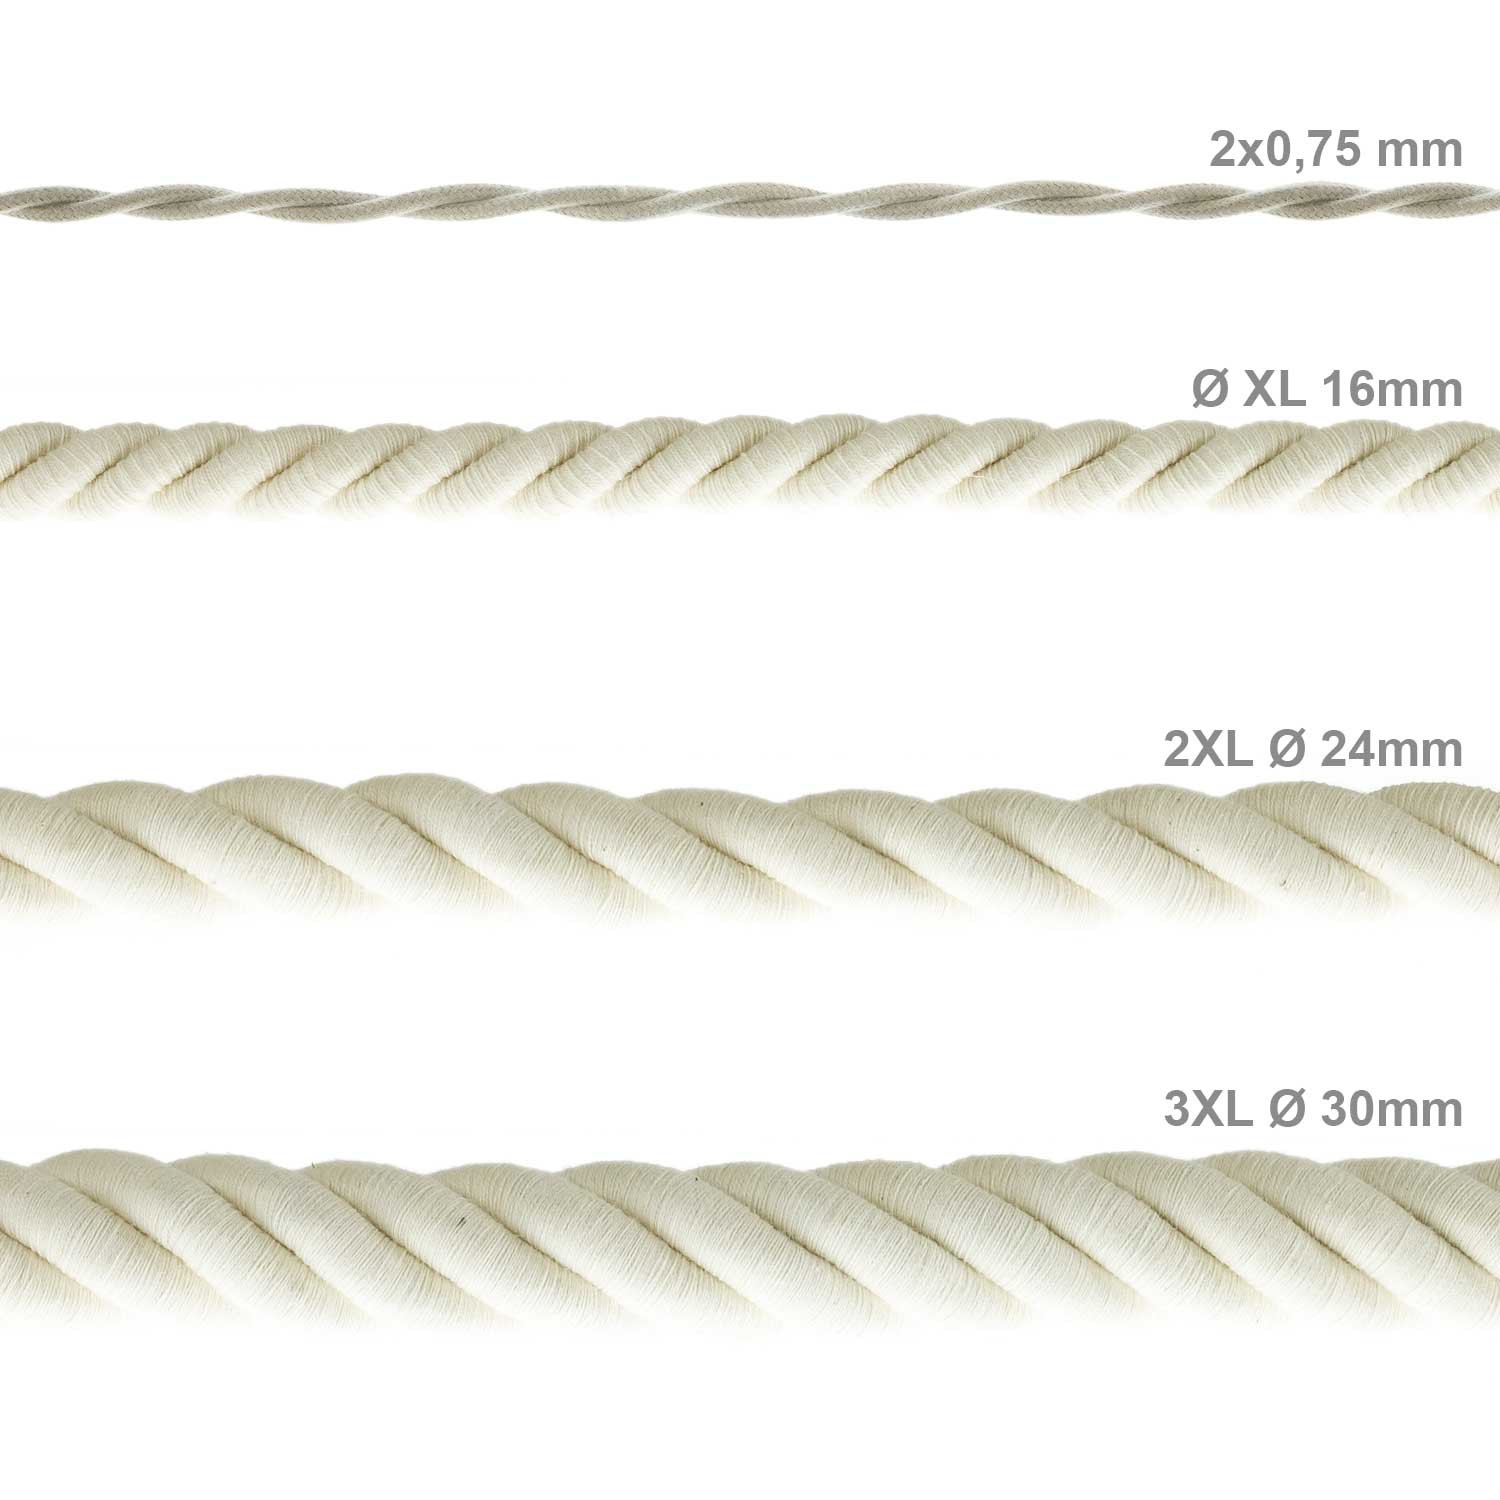 2XL Rope electrical wire 18/3 AWG wire inside. Raw Cotton Fabric. 24mm.